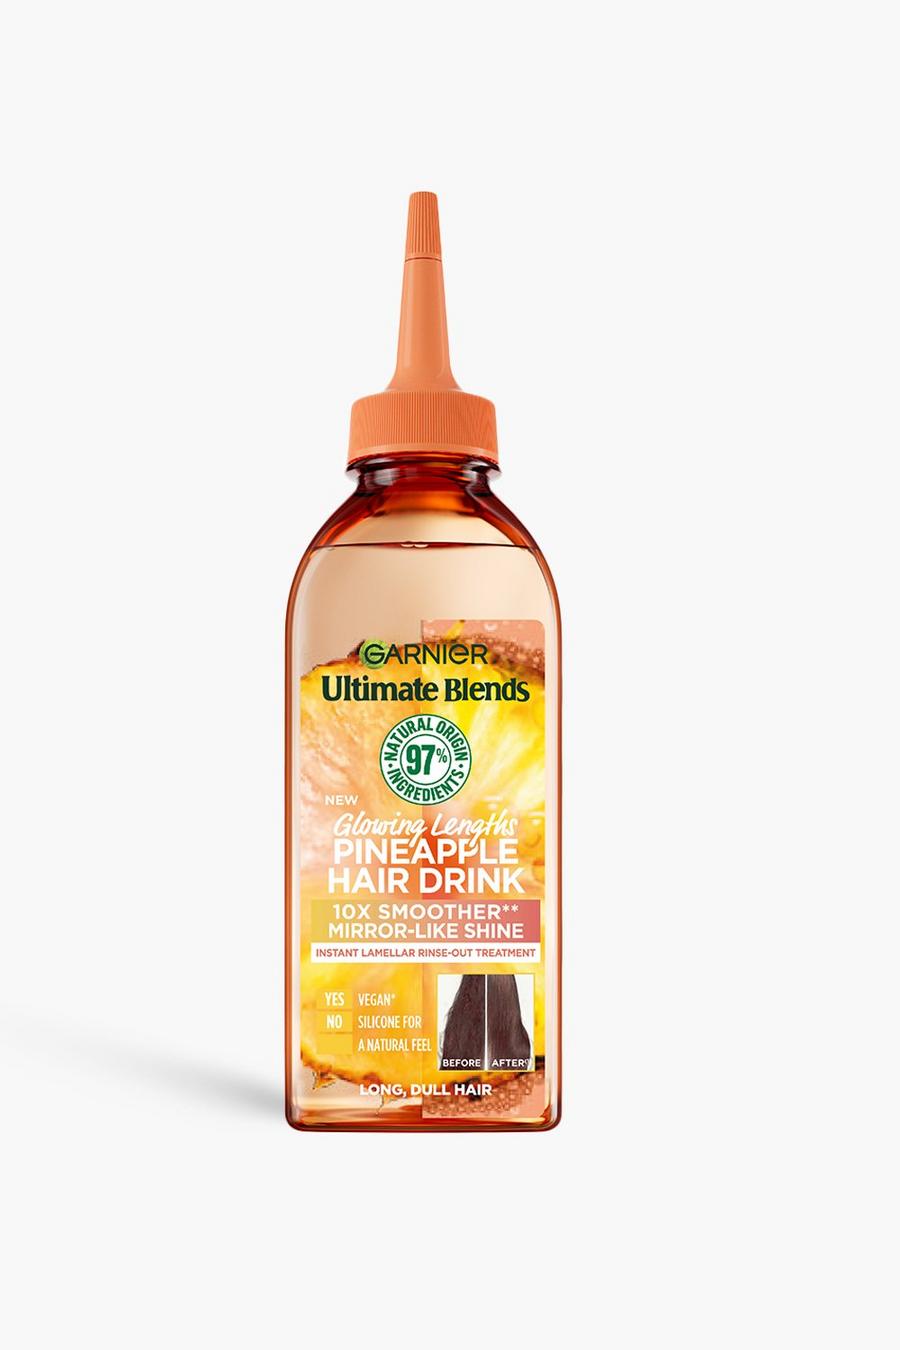 Multi Garnier Ultimate Blends Glowing Lengths Pineapple Hair Drink liquid conditioner for, long dull hair